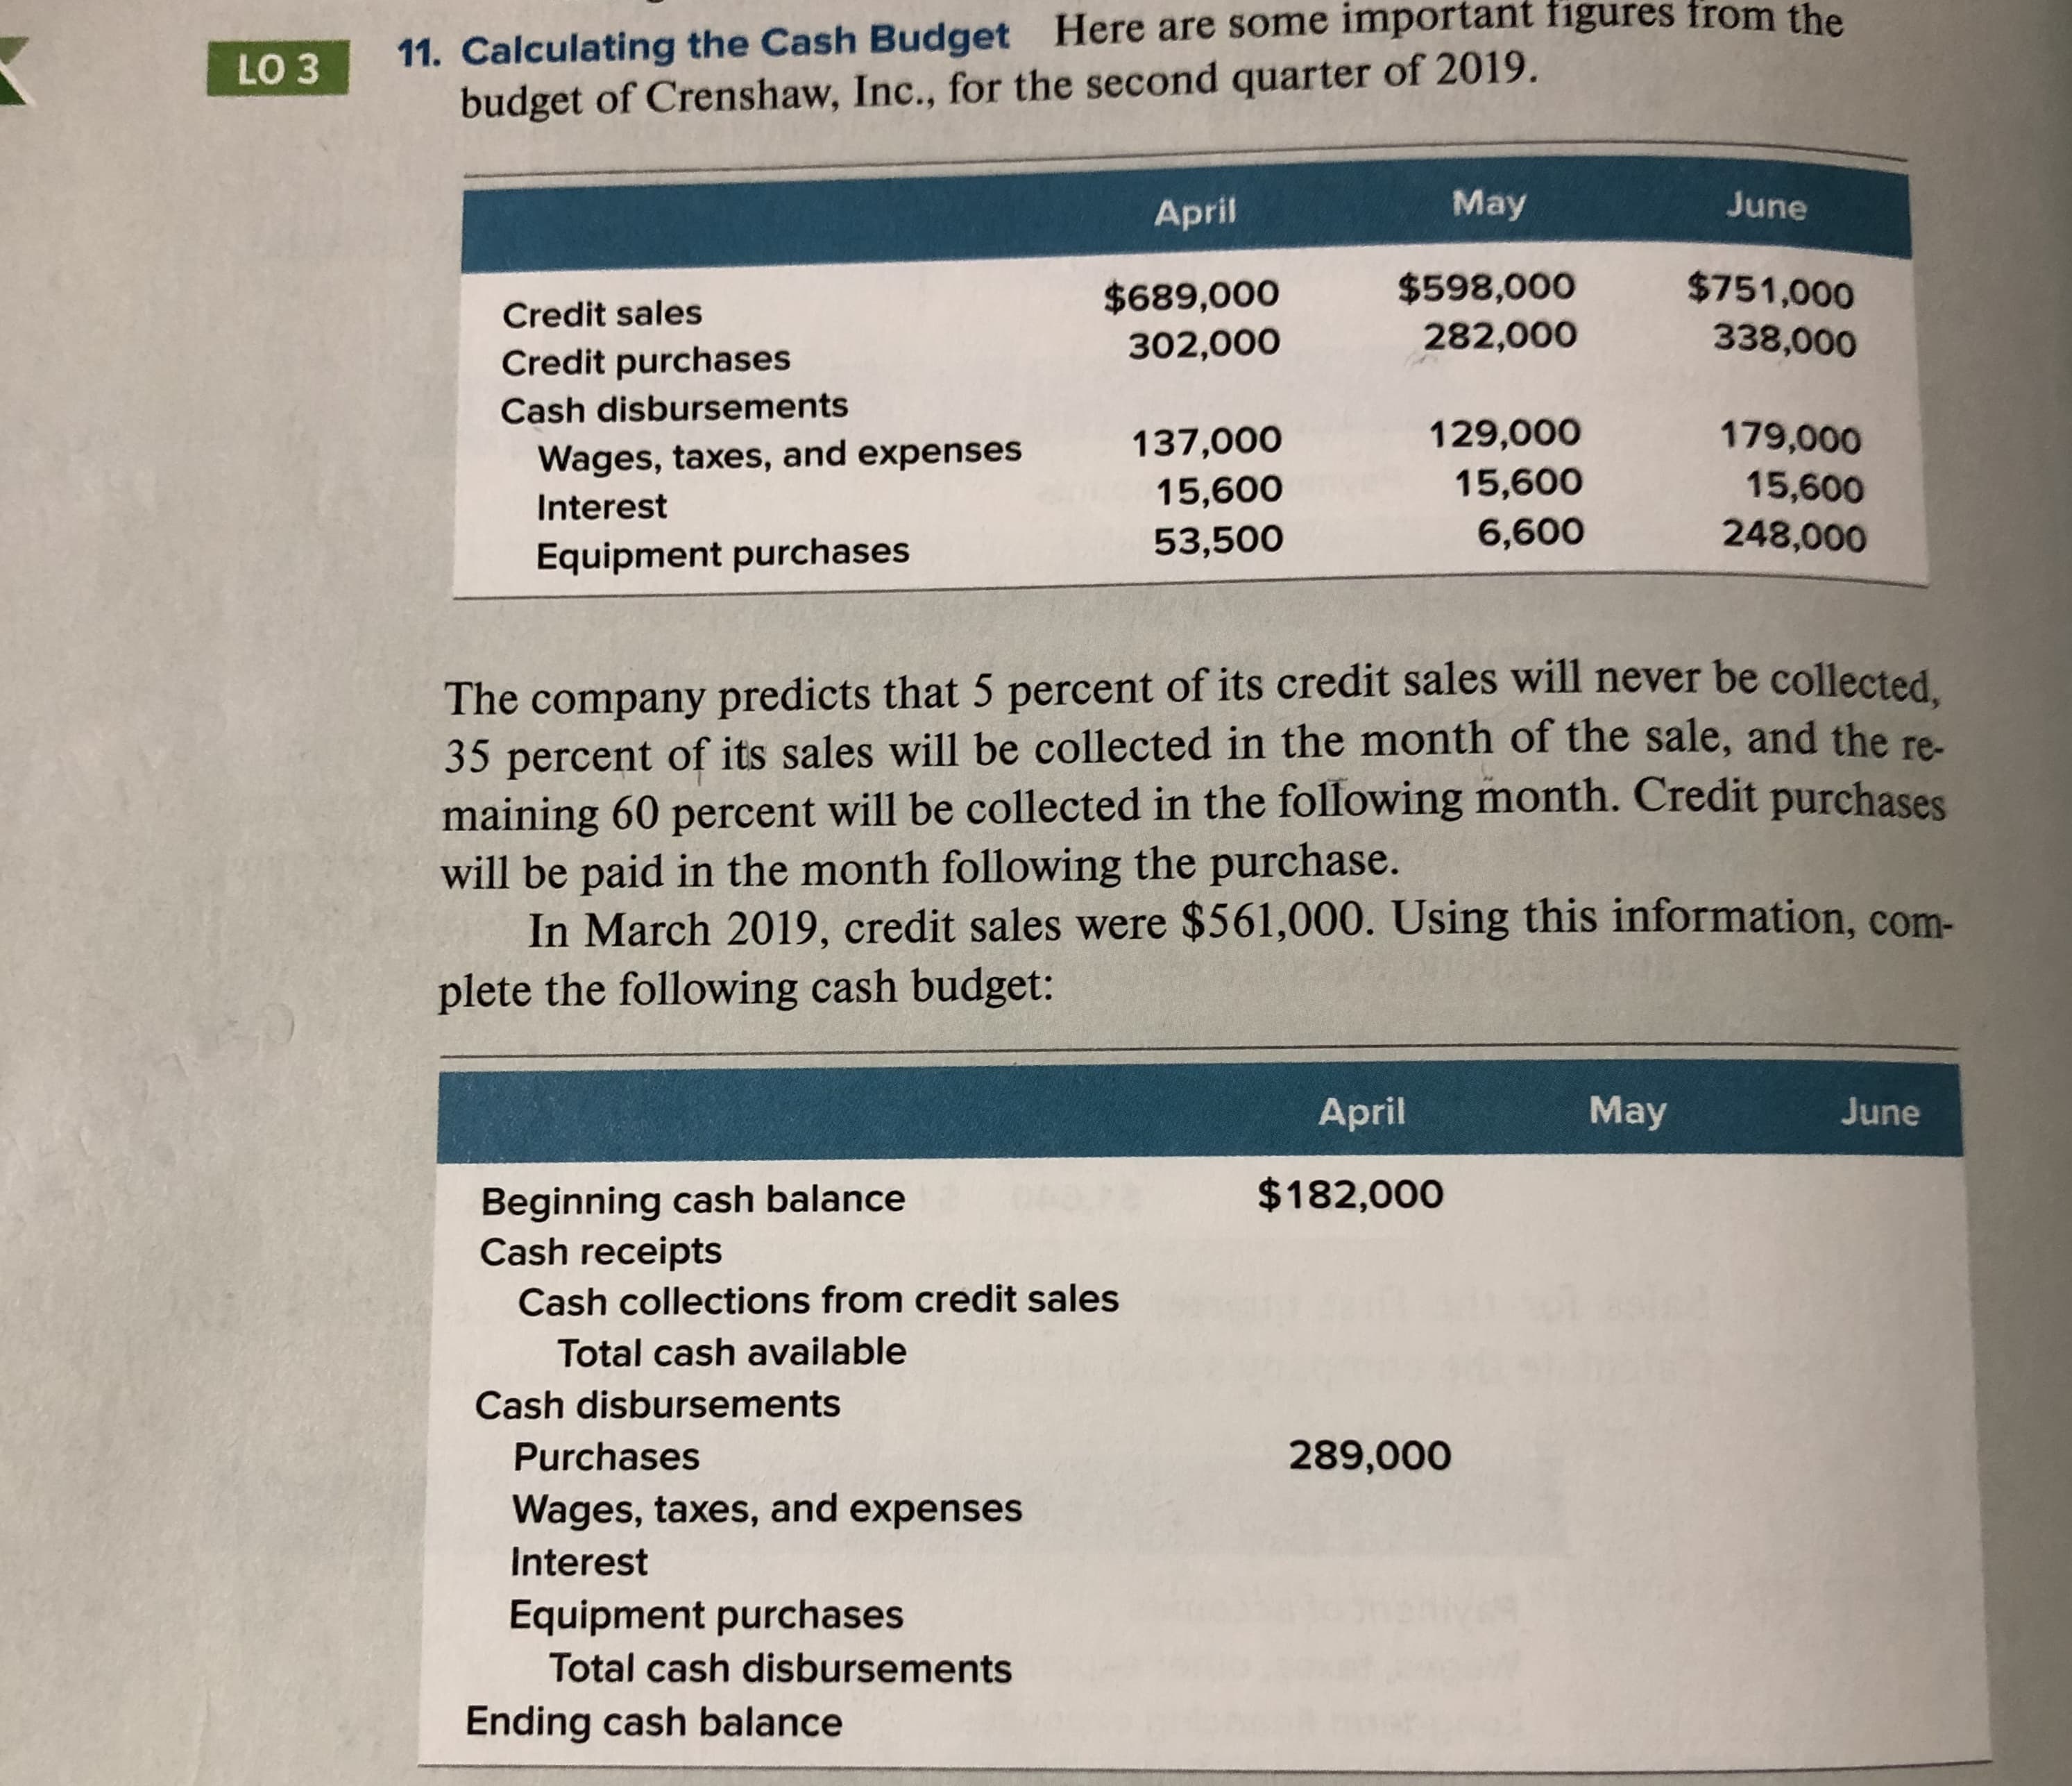 11. Calculating the Cash Budget Here are some important figures from the
budget of Crenshaw, Inc., for the second quarter of 2019.
LO 3
April
May
June
$598,000
282,000
$689,000
$751,000
Credit sales
302,000
338,000
Credit purchases
Cash disbursements
137,000
129,000
179,000
Wages, taxes, and expenses
15,600
15,600
15,600
Interest
53,500
6,600
248,000
Equipment purchases
The company predicts that 5 percent of its credit sales will never be collected
35 percent of its sales will be collected in the month of the sale, and the re-
maining 60 percent will be collected in the following month. Credit purchases
will be paid in the month following the purchase.
In March 2019, credit sales were $561,000. Using this information, com-
plete the following cash budget:
April
May
June
$182,000
Beginning cash balance
Cash receipts
Cash collections from credit sales
Total cash available
Cash disbursements
Purchases
289,000
Wages, taxes, and expenses
Interest
Equipment purchases
Total cash disbursements
Ending cash balance
